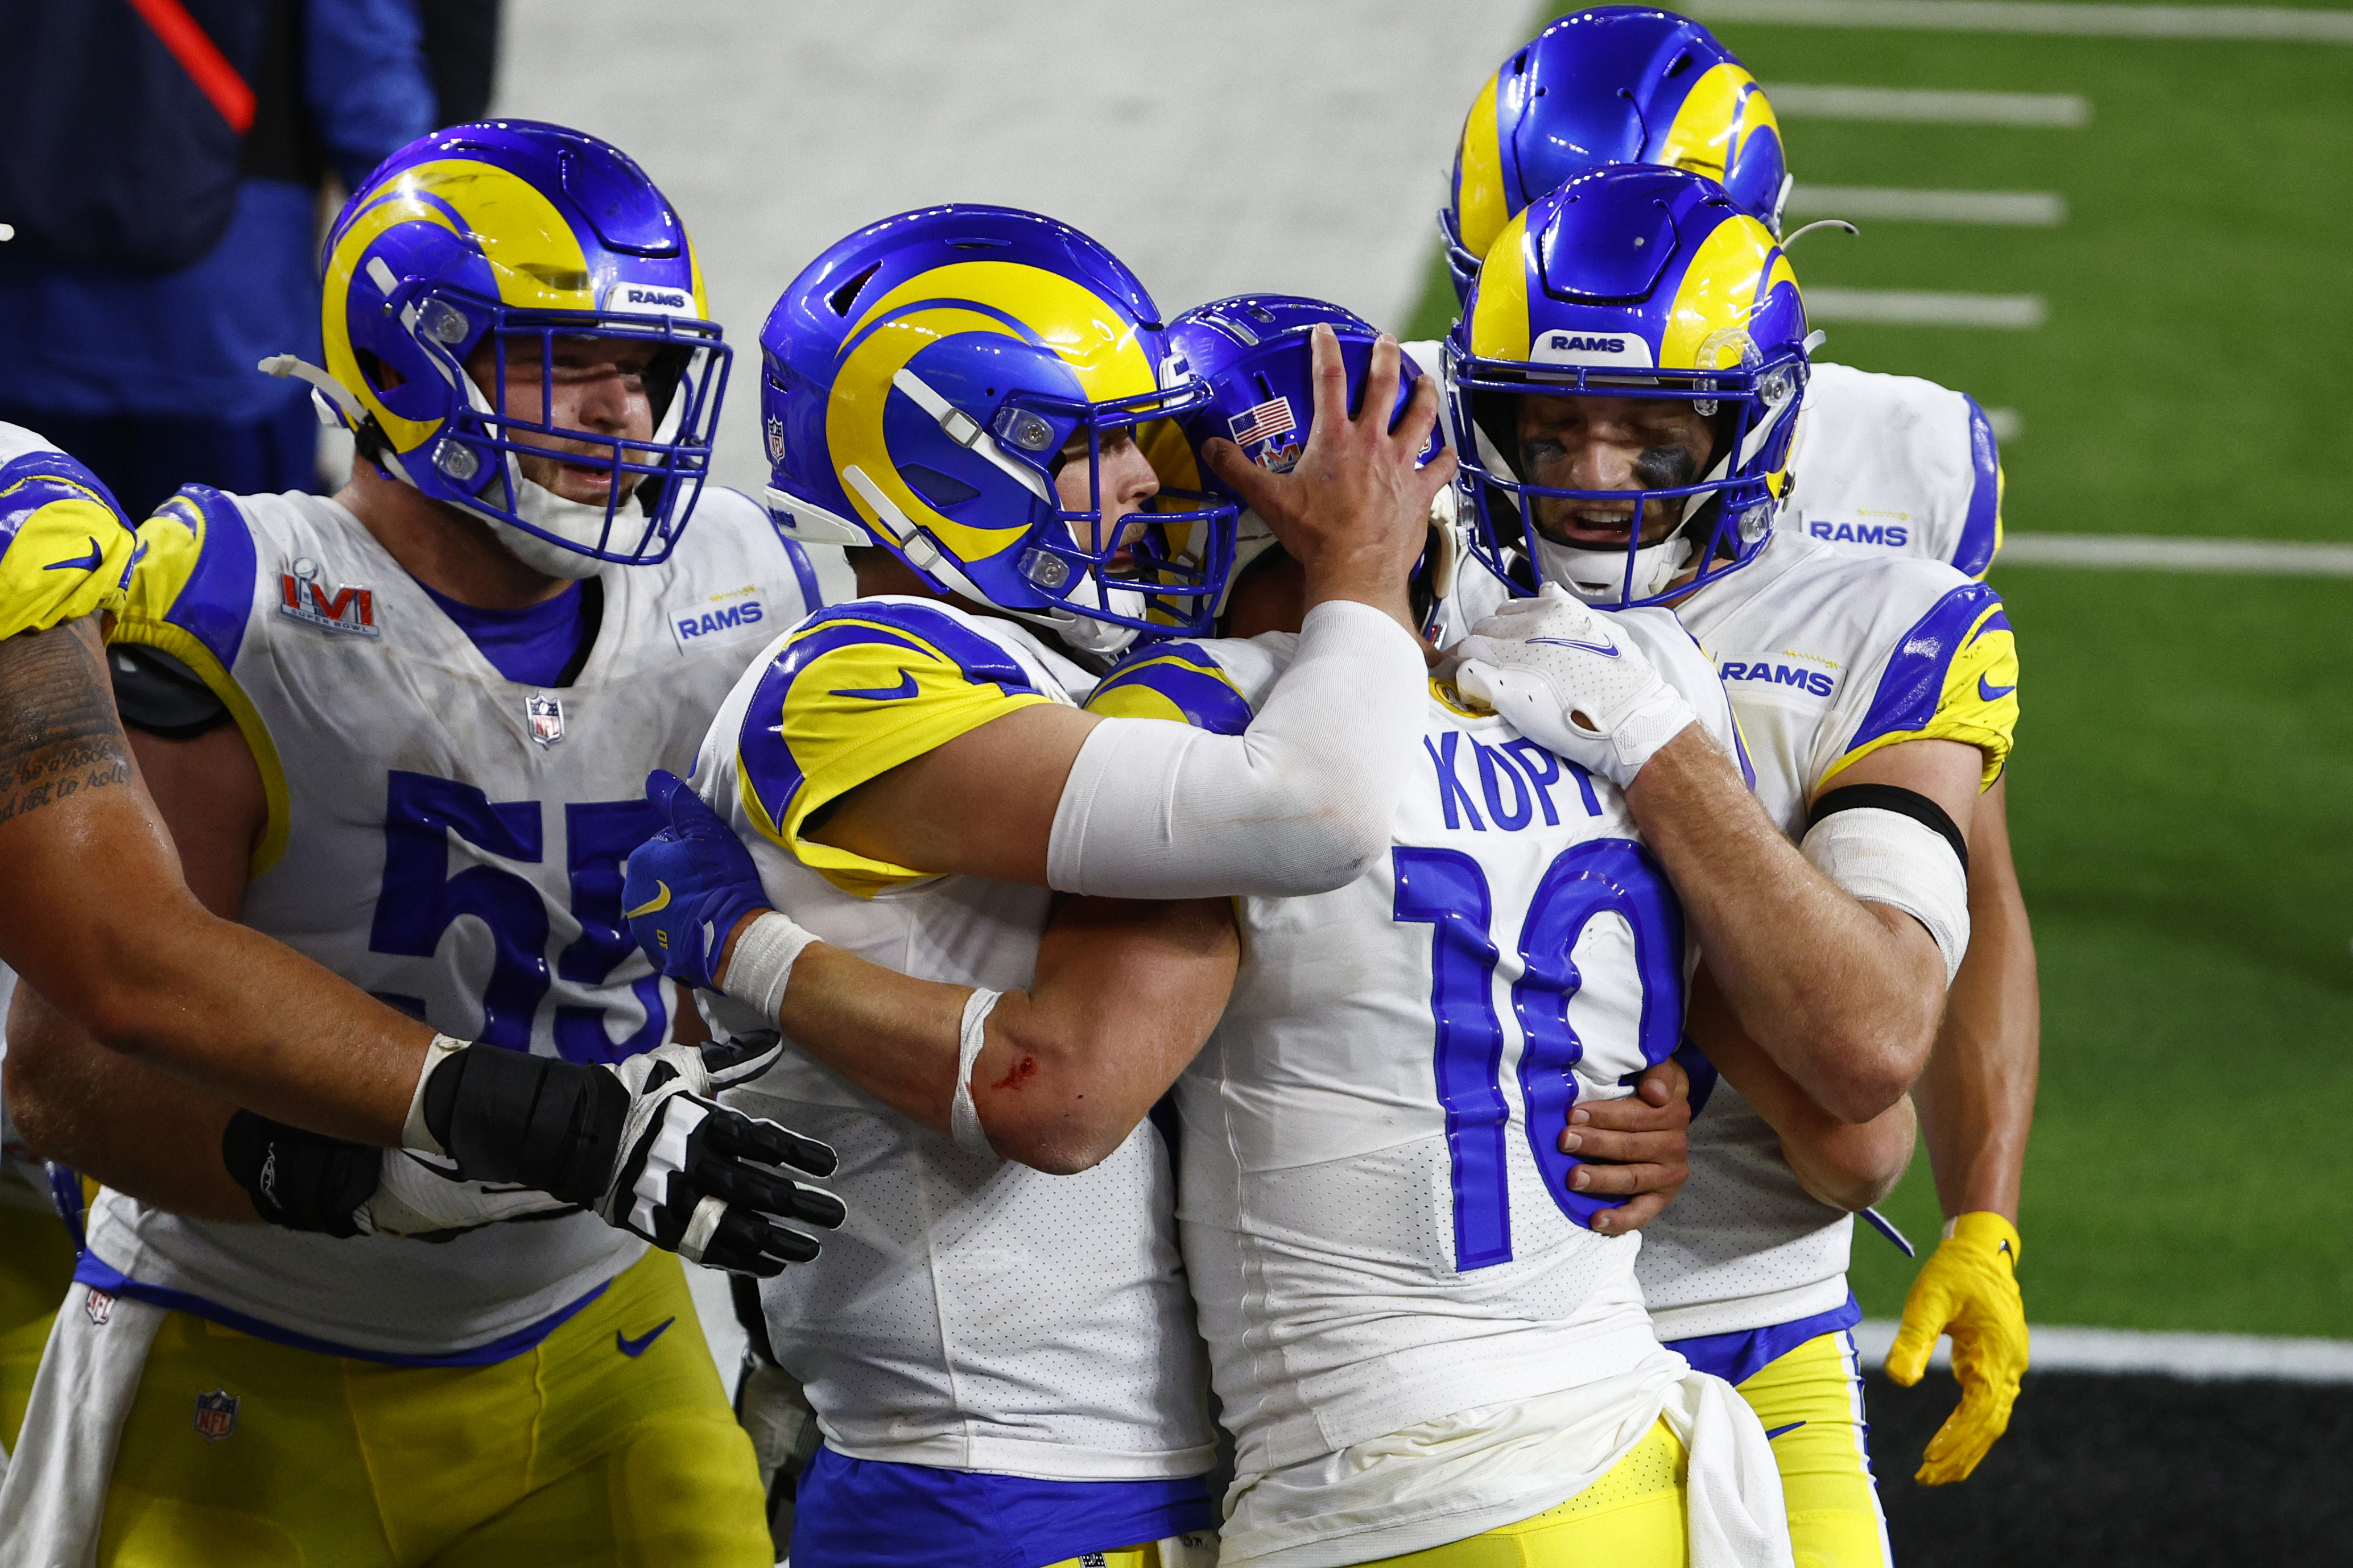 Cooper Kupp #10 of the Los Angeles Rams reacts with Matthew Stafford #9 following a touchdown reception during the fourth quarter of Super Bowl LVI against the Cincinnati Bengals at SoFi Stadium on February 13, 2022 in Inglewood, California.